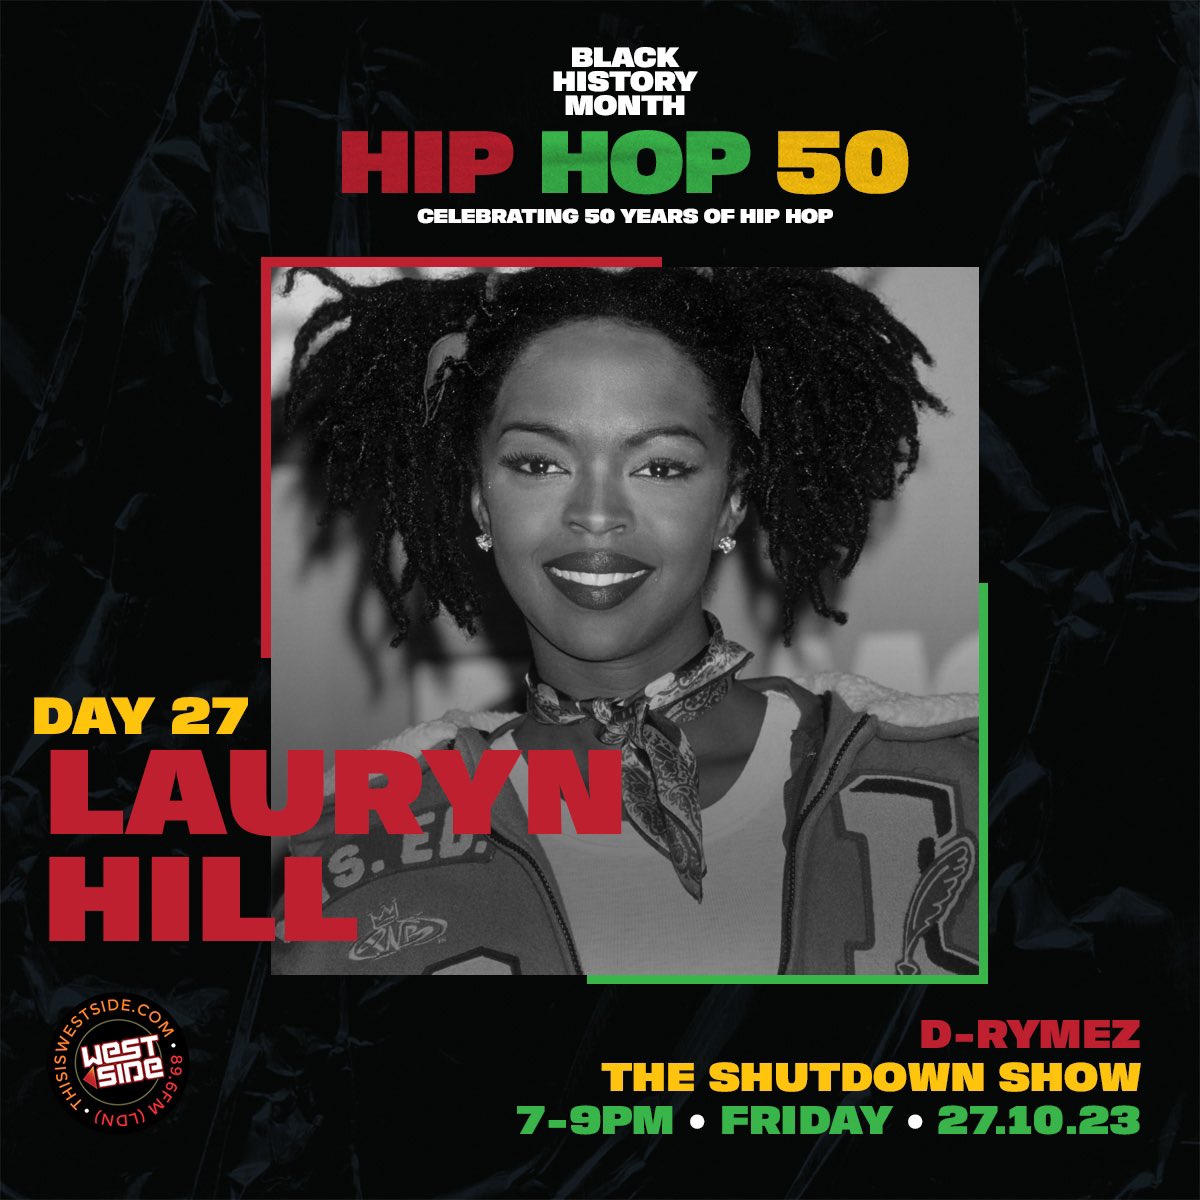 #BlackHistoryMonth Day 27 - Celebrating 50 years of Hip Hop with a tribute to the legend @MsLaurynHill on #TheShutdownShow w/ @drymez 7-9pm 🔊 thisiswestside.com | 89.6FM LDN